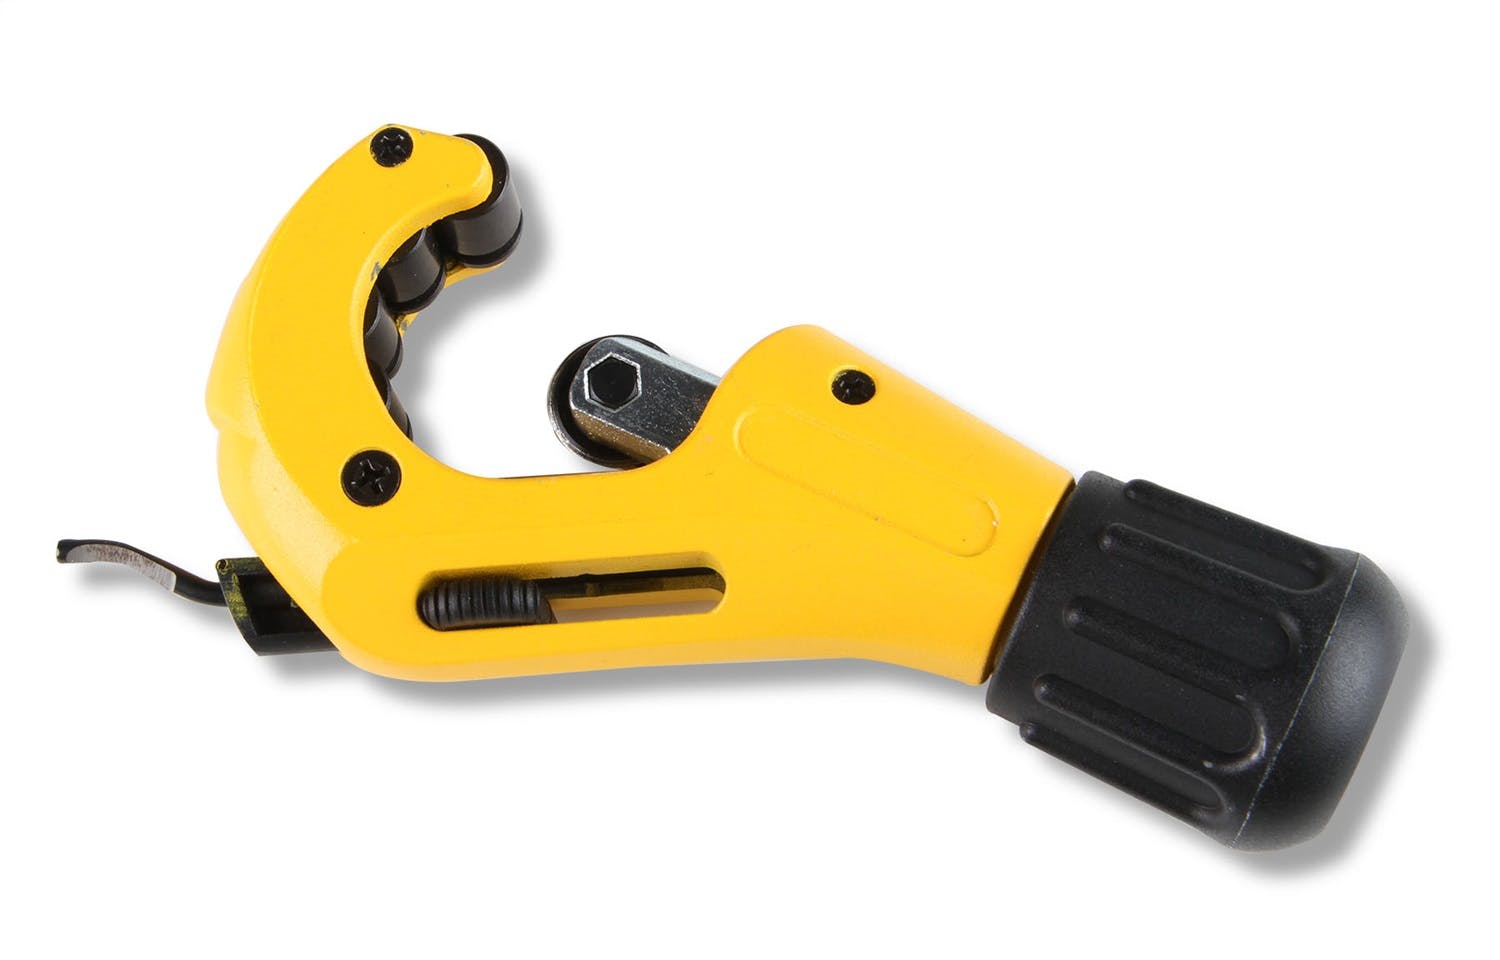 Earl's Performance Plumbing 003ERL TUBING CUTTER WITH DEBURING TOOL AND SS